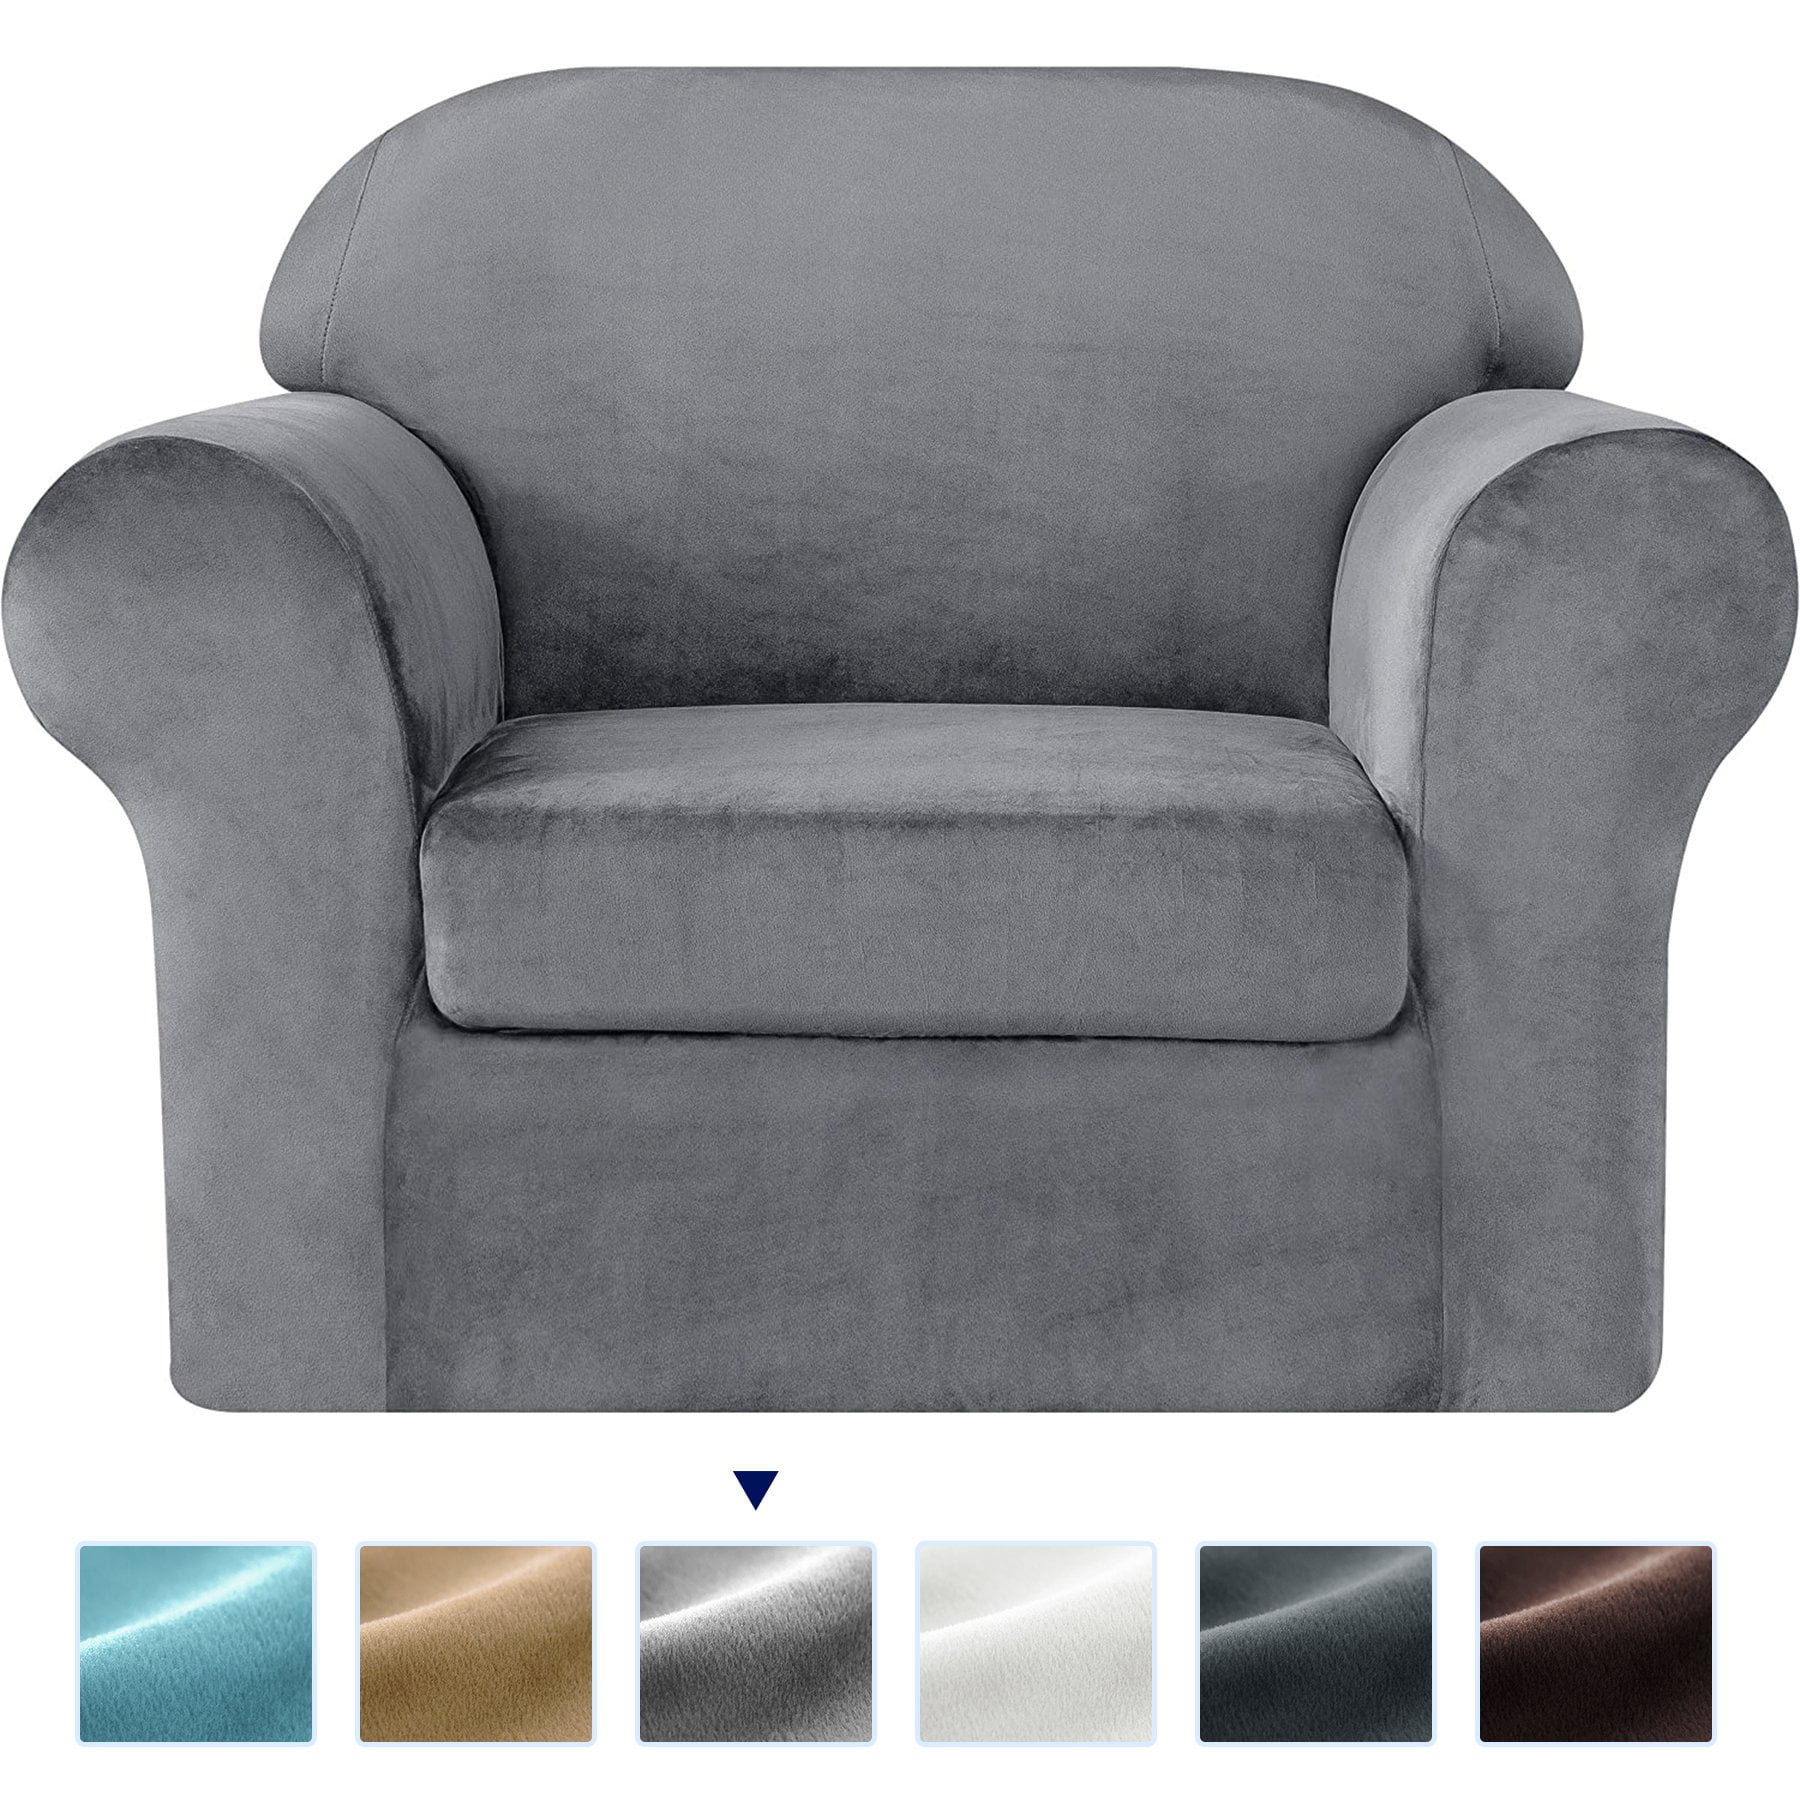 Details about   JINAMART™ Stretch Furniture Armchair Cover Slipcover with 2 Throw Pillow Cover 